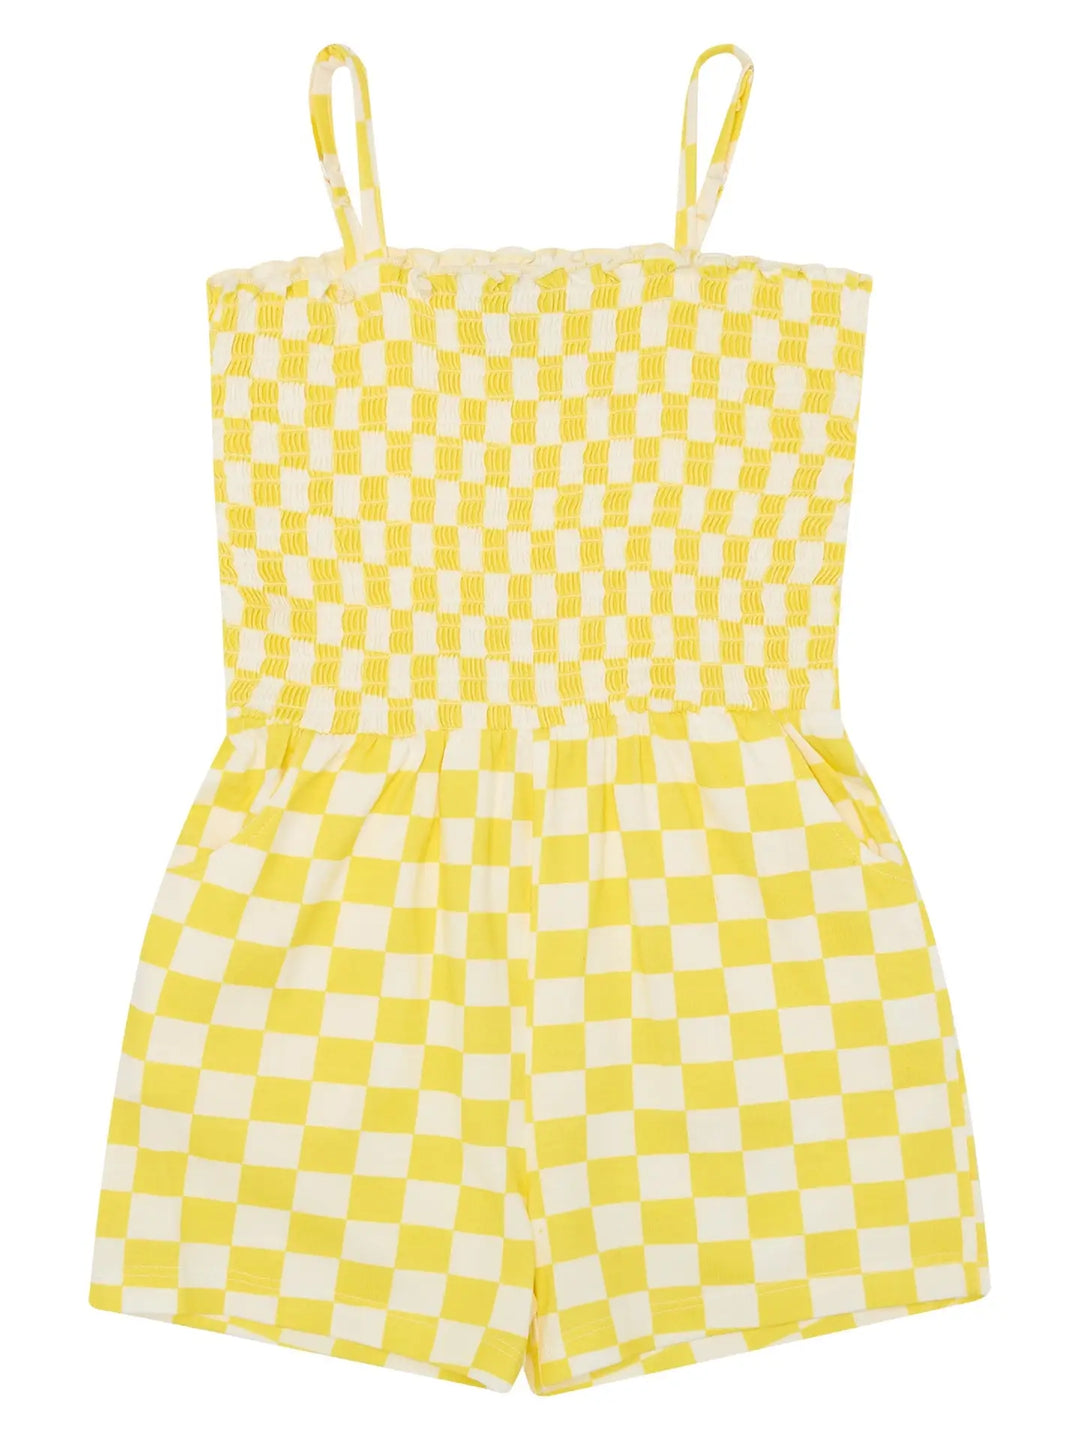 Checkerboard Playsuit, Yellow